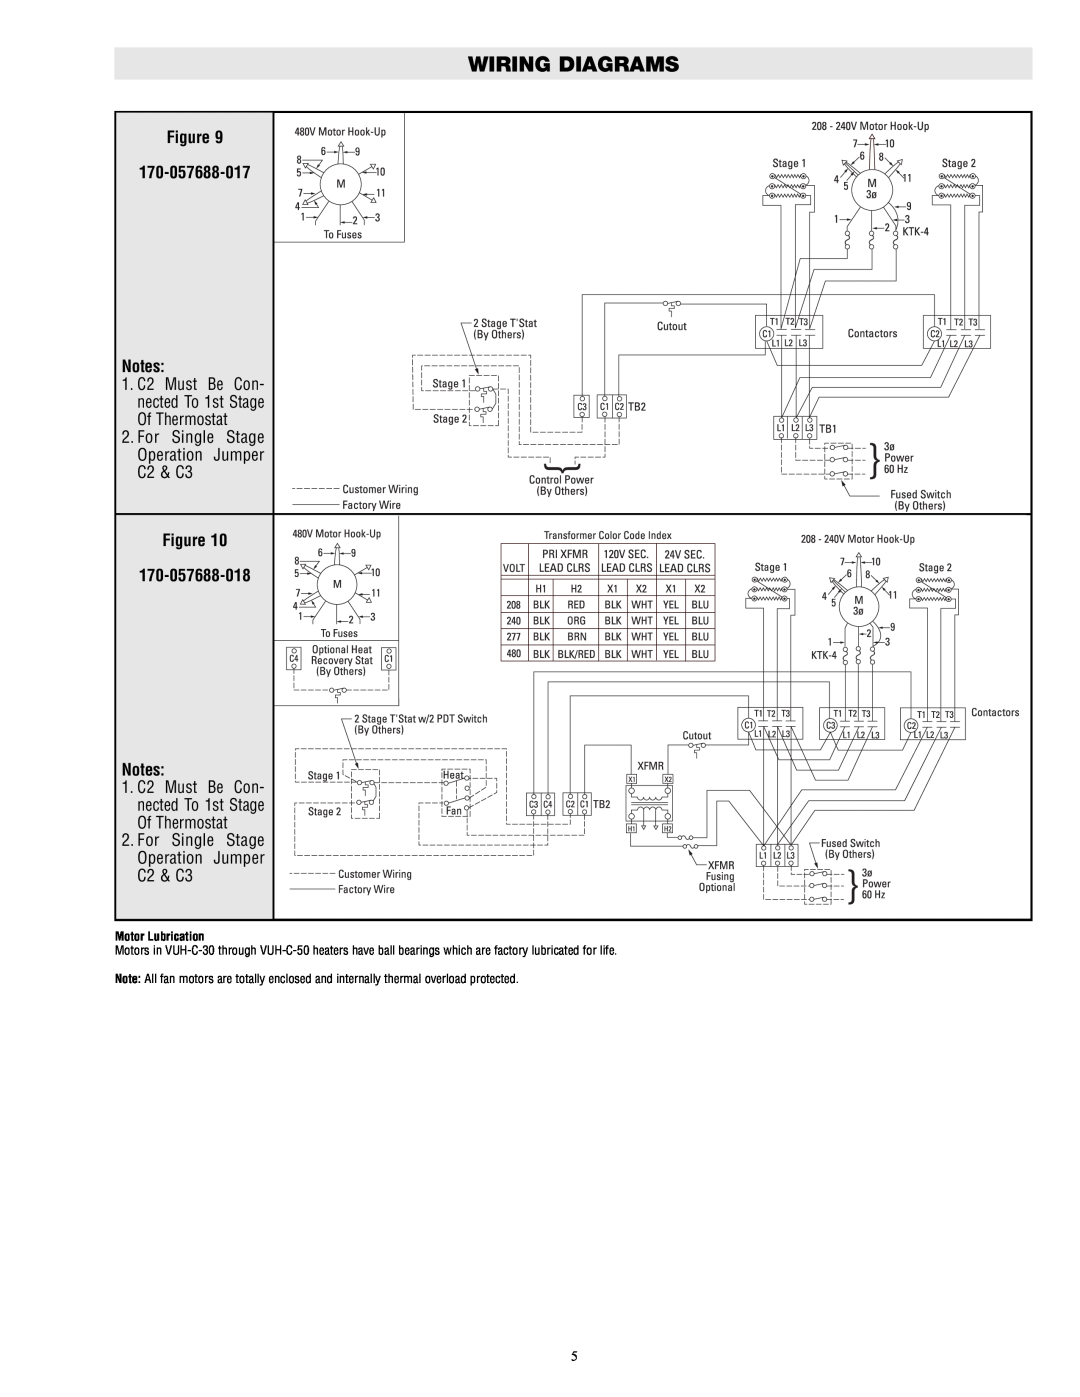 Chromalox PF452-4 specifications 057688-017 Notes, 057688-018 Notes, Wiring Diagrams, 1. C2 Must Be Con nected To 1st Stage 